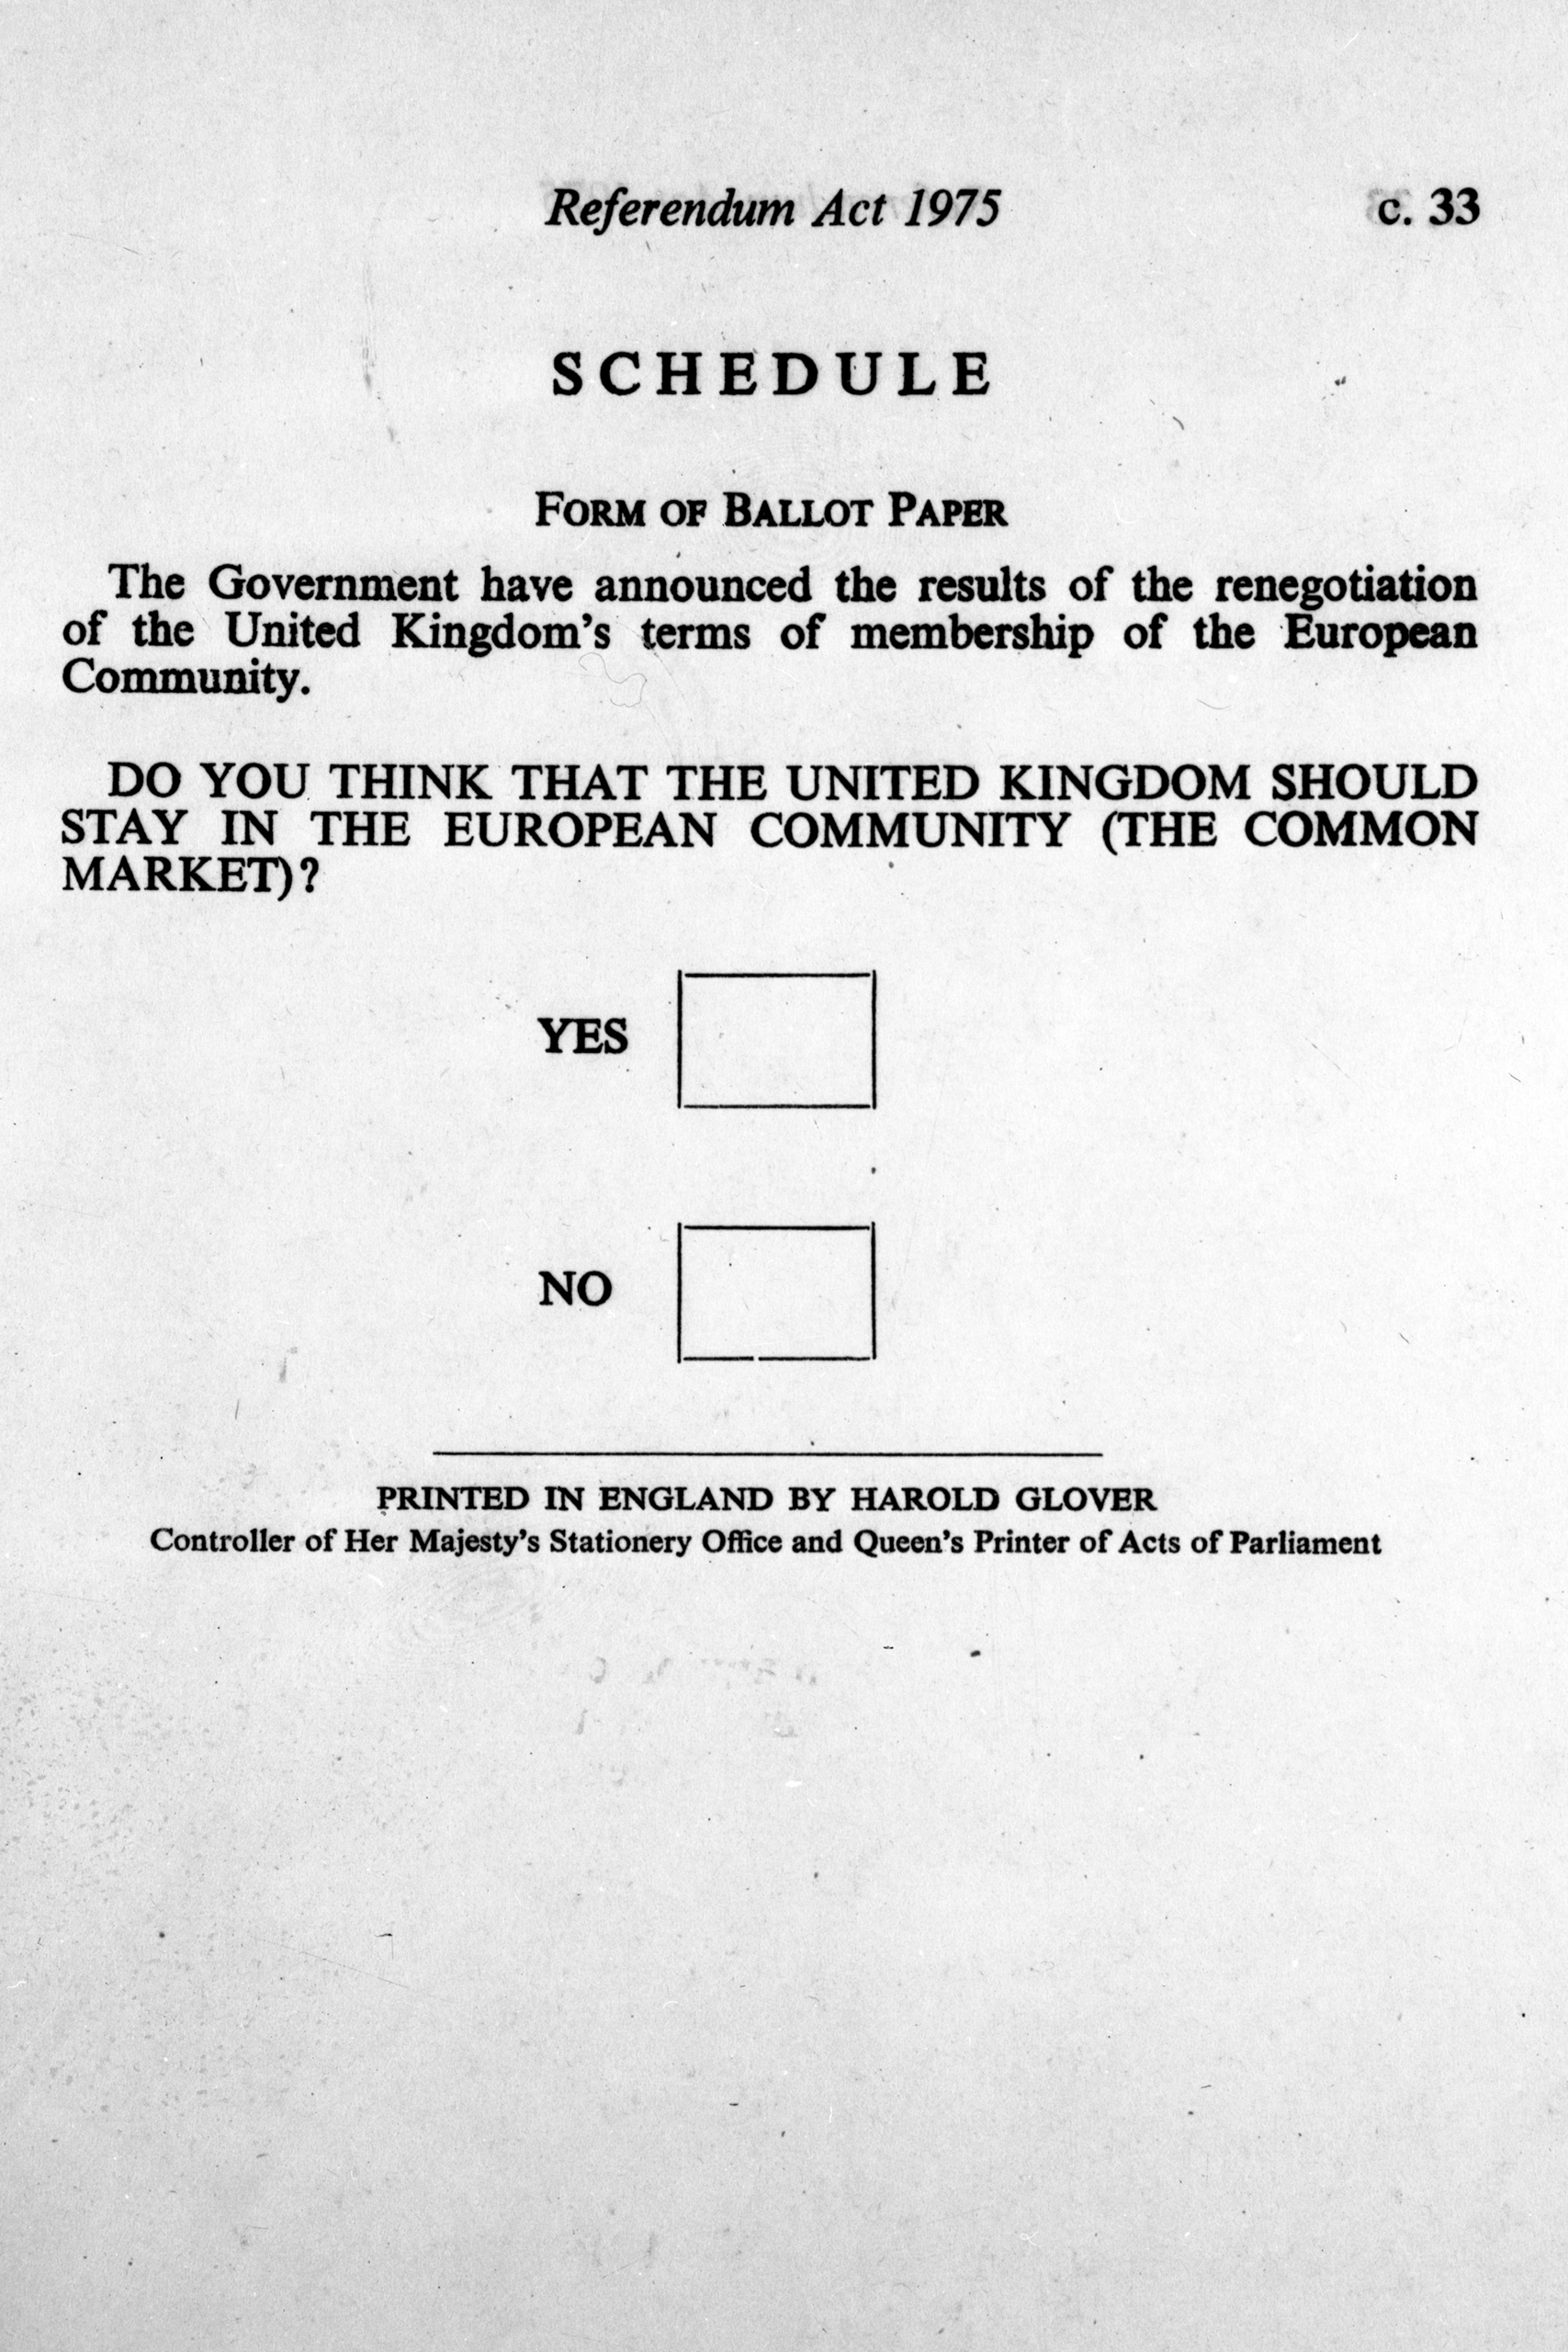 A picture of the schedule to the Referendum Act, which lays down the form of words to be used on the ballot paper. 1975.